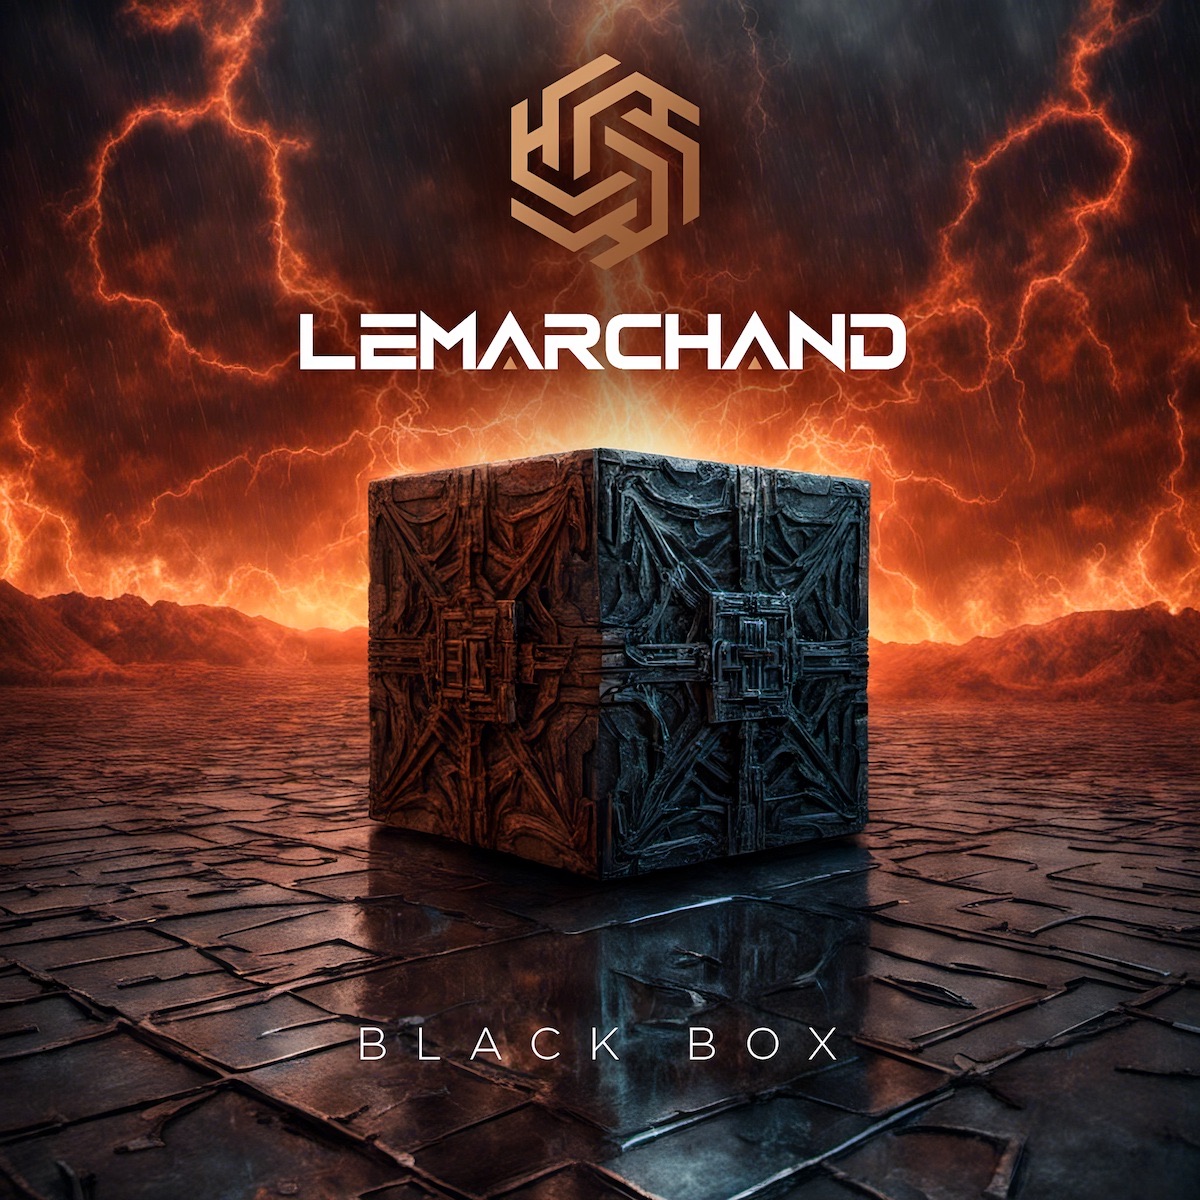 DEBUT ALBUM REVIEW: Black Box by Lemarchand